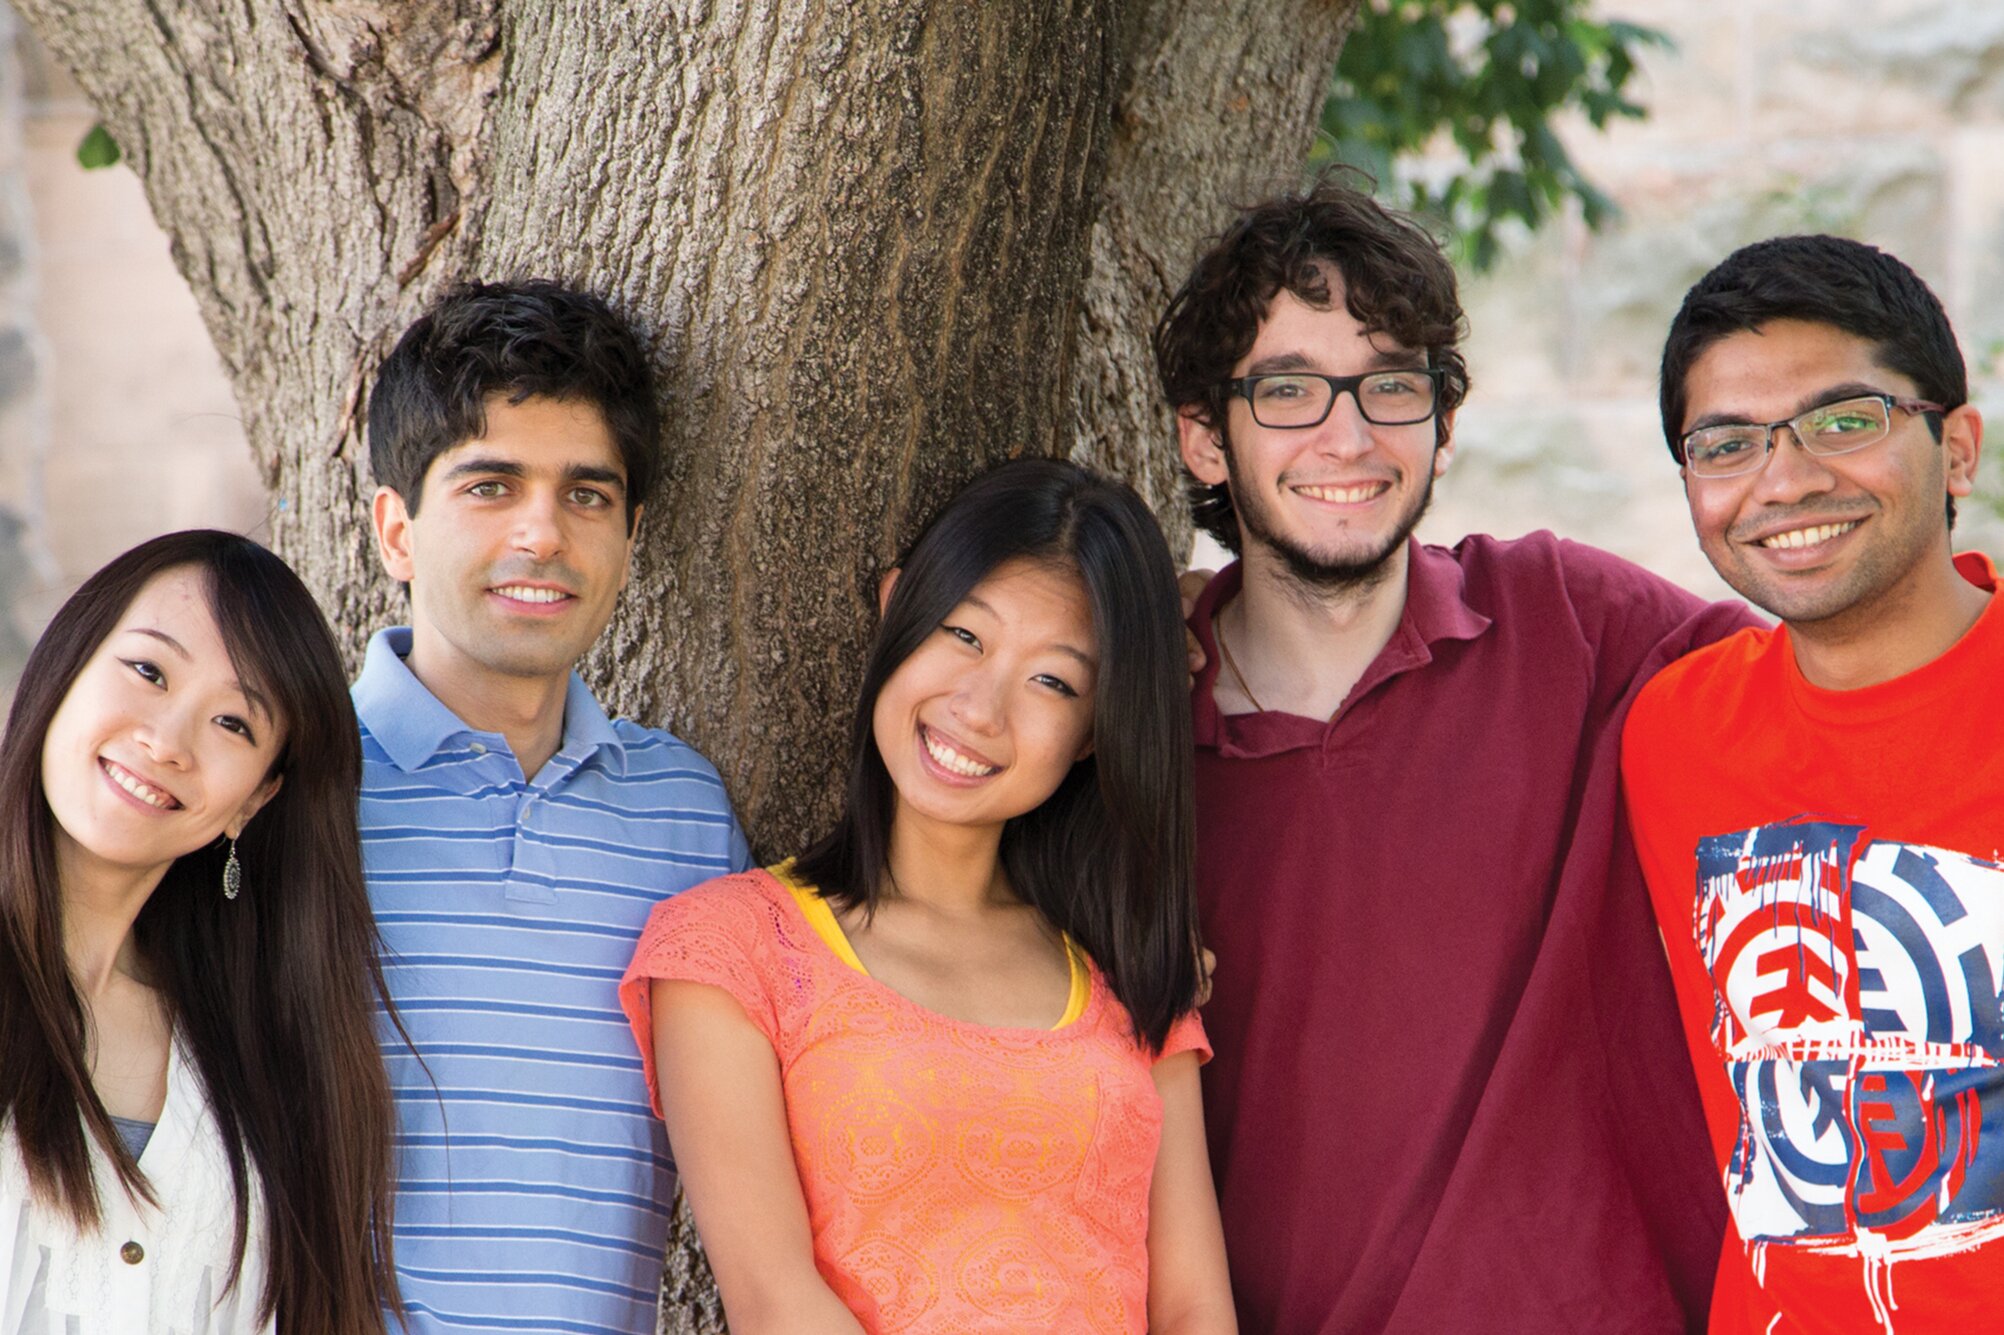 Group photo of diverse international students posing on campus